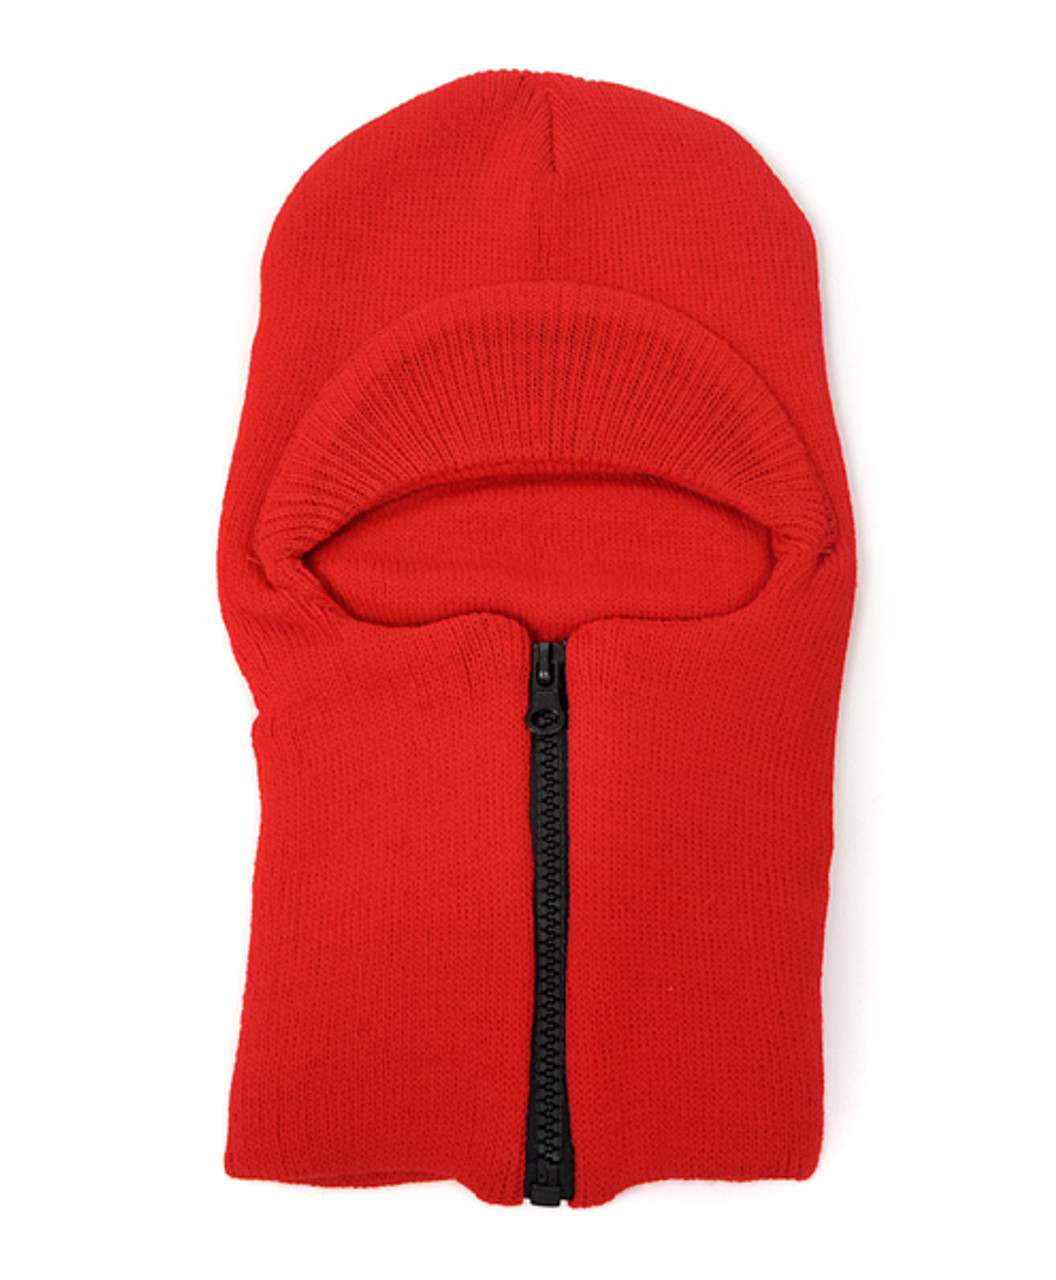 One Hole Face Mask/Ski Mask with Visor and Zipper Front - LH1004